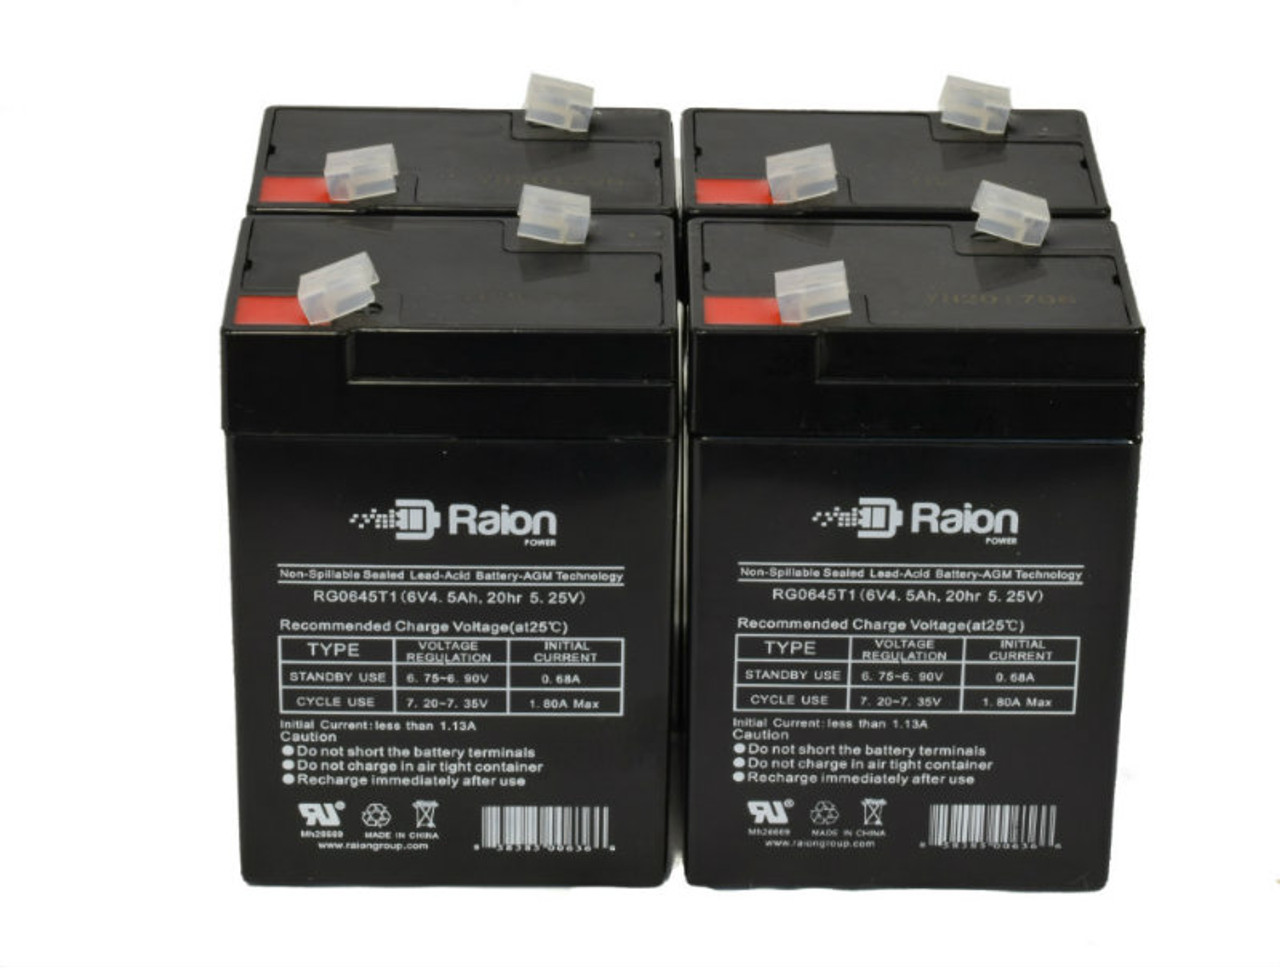 Raion Power 6 Volt 4.5Ah RG0645T1 Replacement Battery for XNB SN06004 - 4 Pack